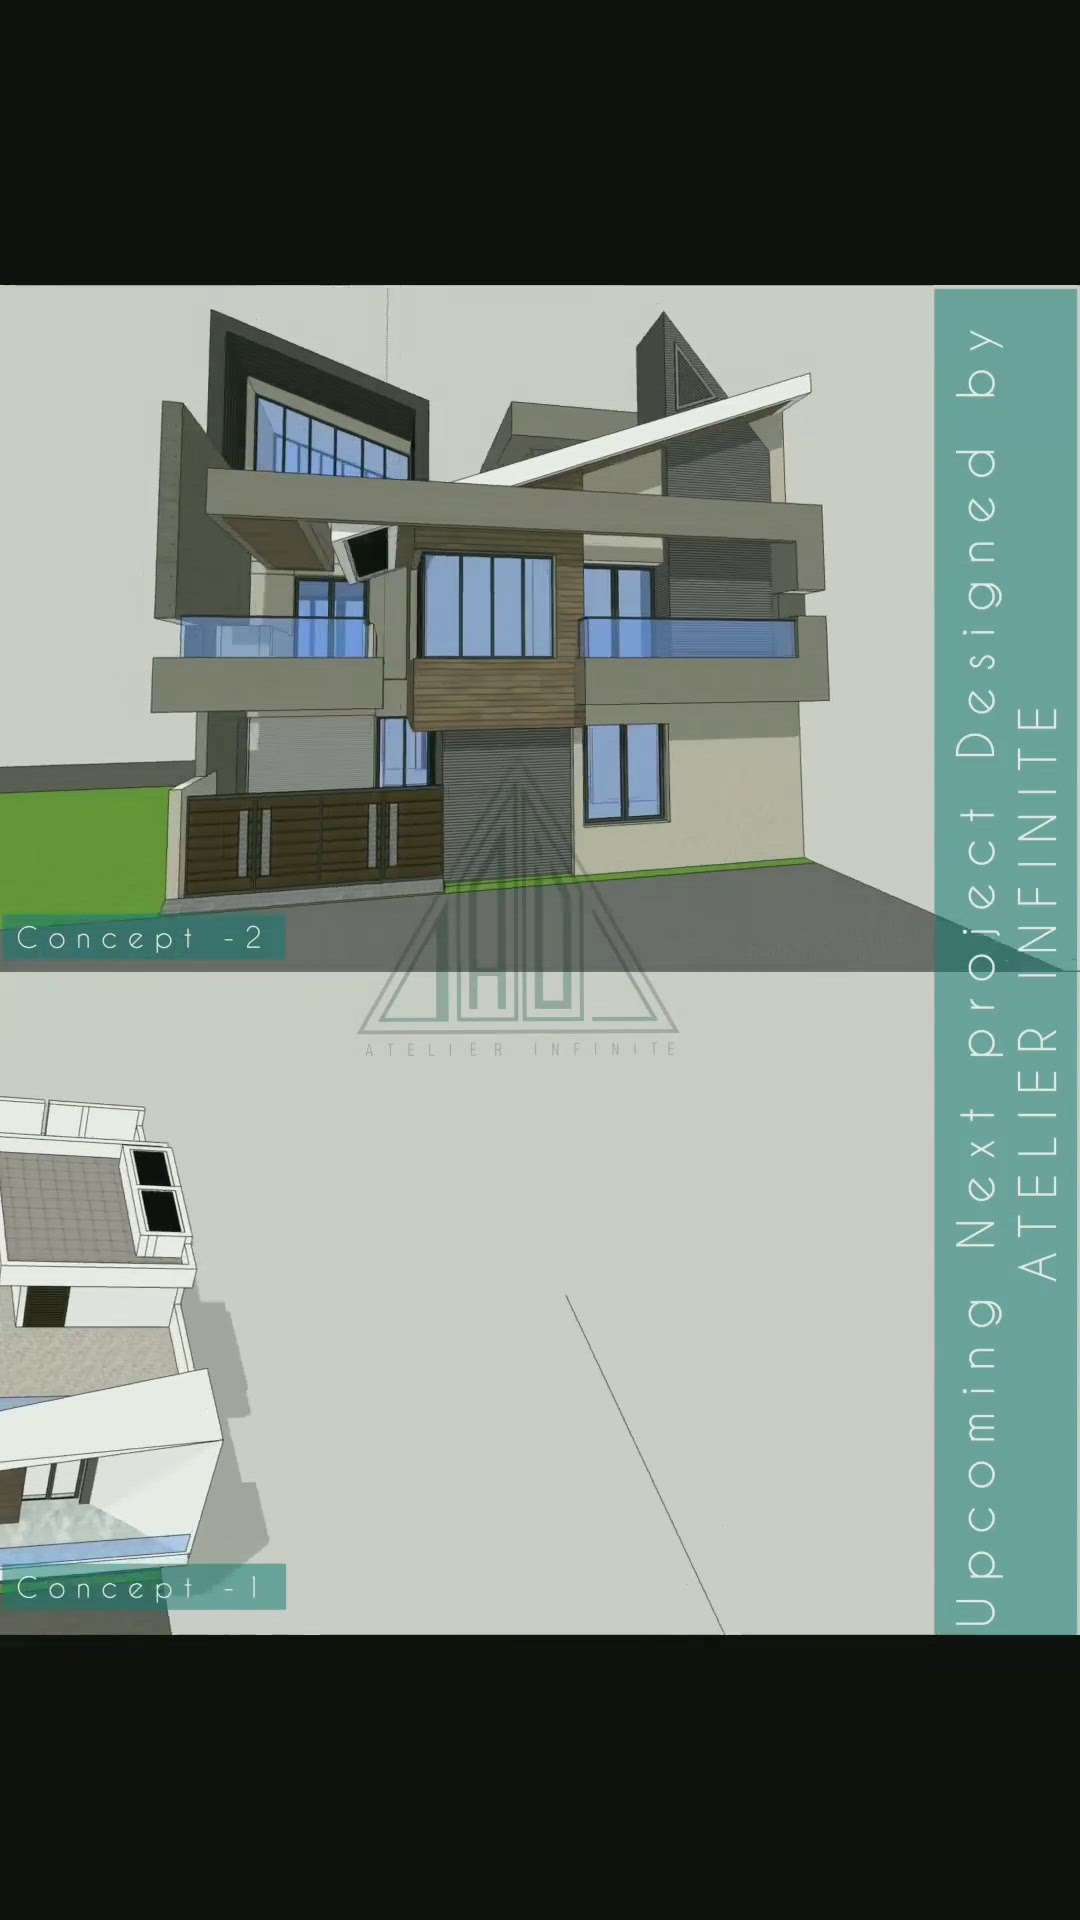 up coming next project designed by-atelier infinite
concept 2 v/s concept 1..
 #architecturedesigns #InteriorDesigner #3Delevation #frontElevation #atelierinfinite #indorecity